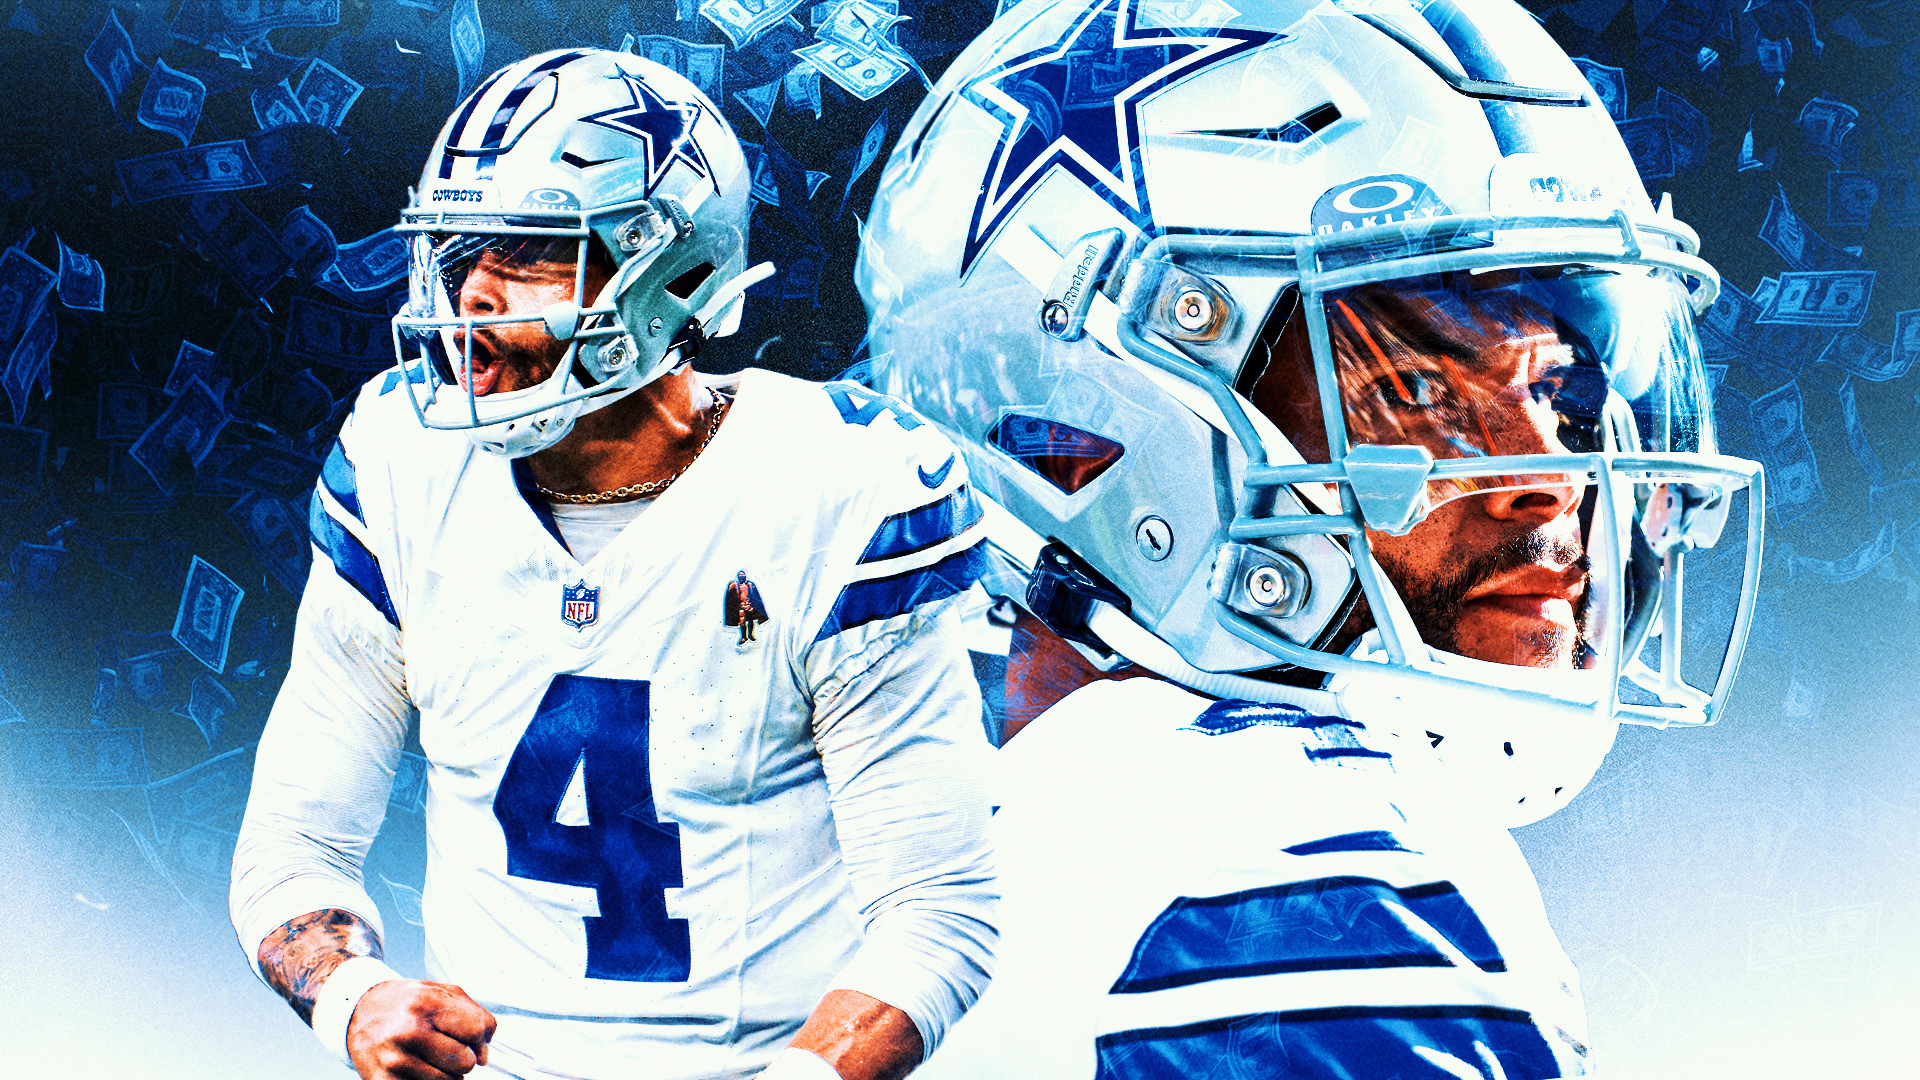 NFL News: The Future of Dak Prescott with the Dallas Cowboys, A Saga of Uncertainty Transforms into Ambitious Growth